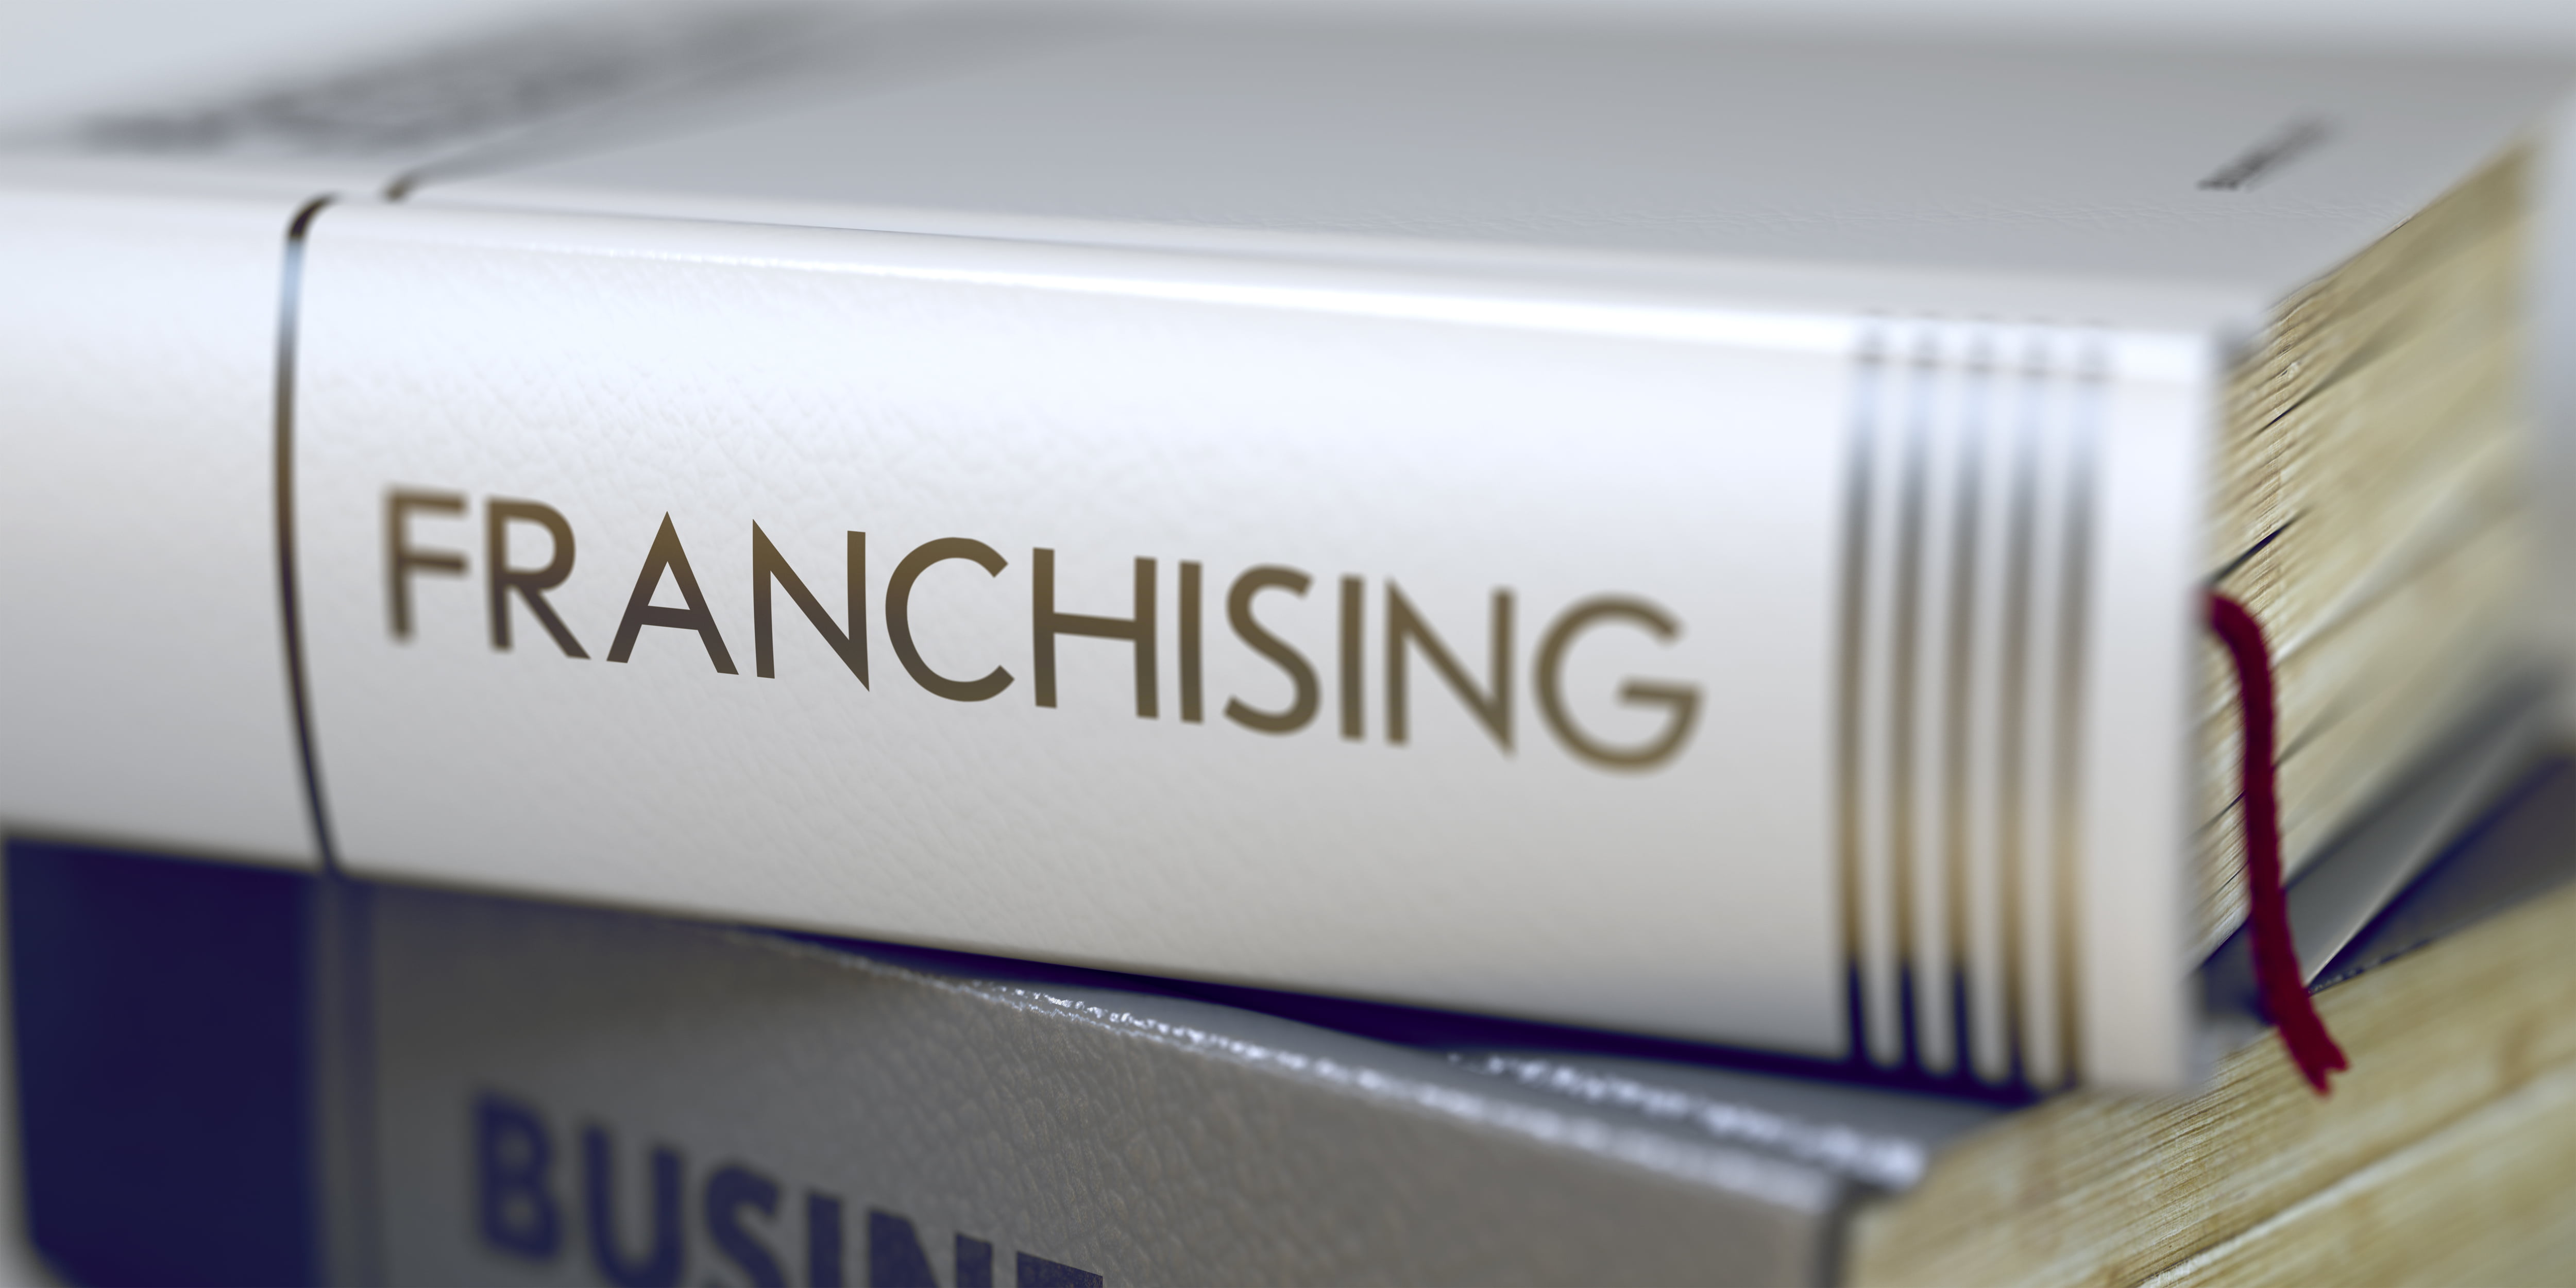 Many franchisees go bankrupt, openly ask about the franchise…